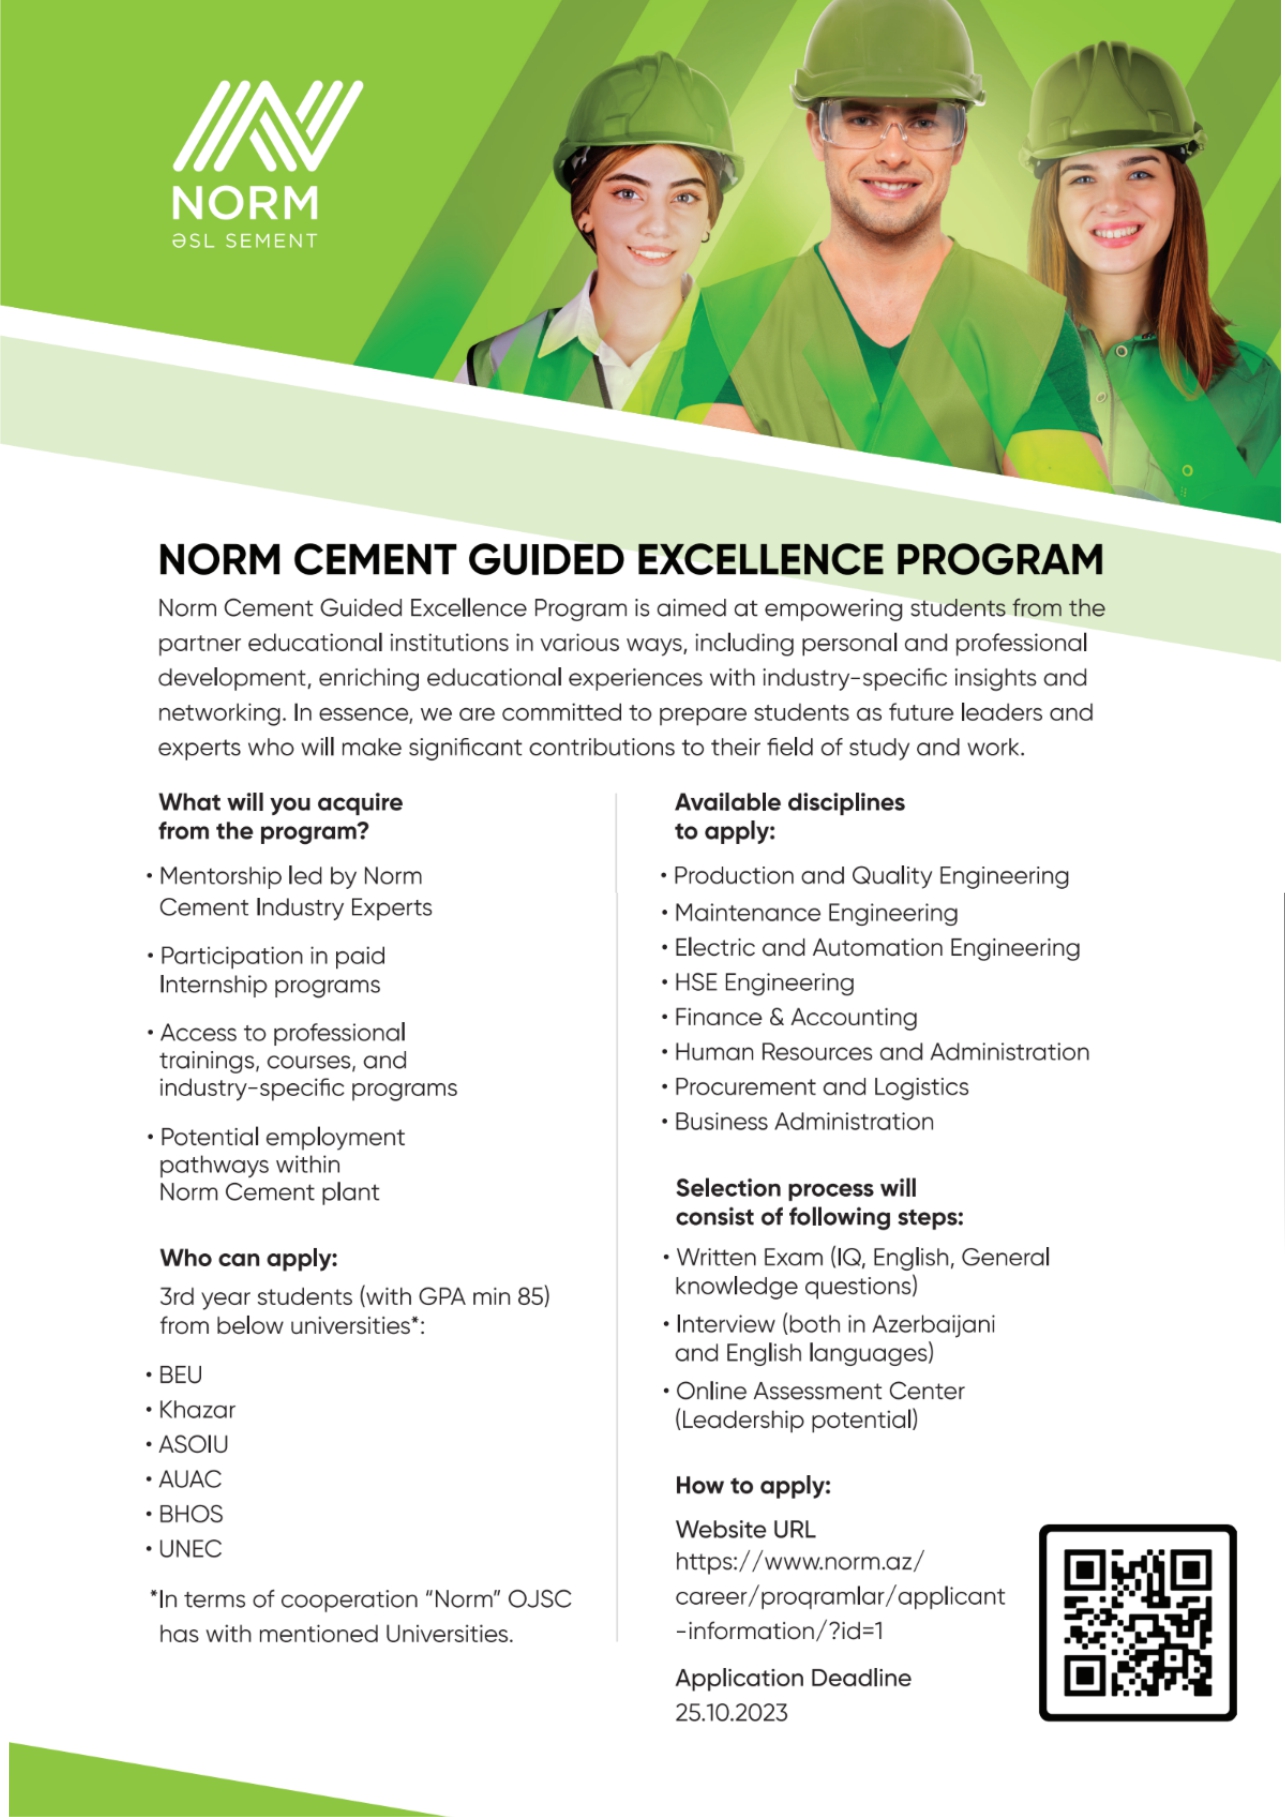 “Guided Excellence” program for students